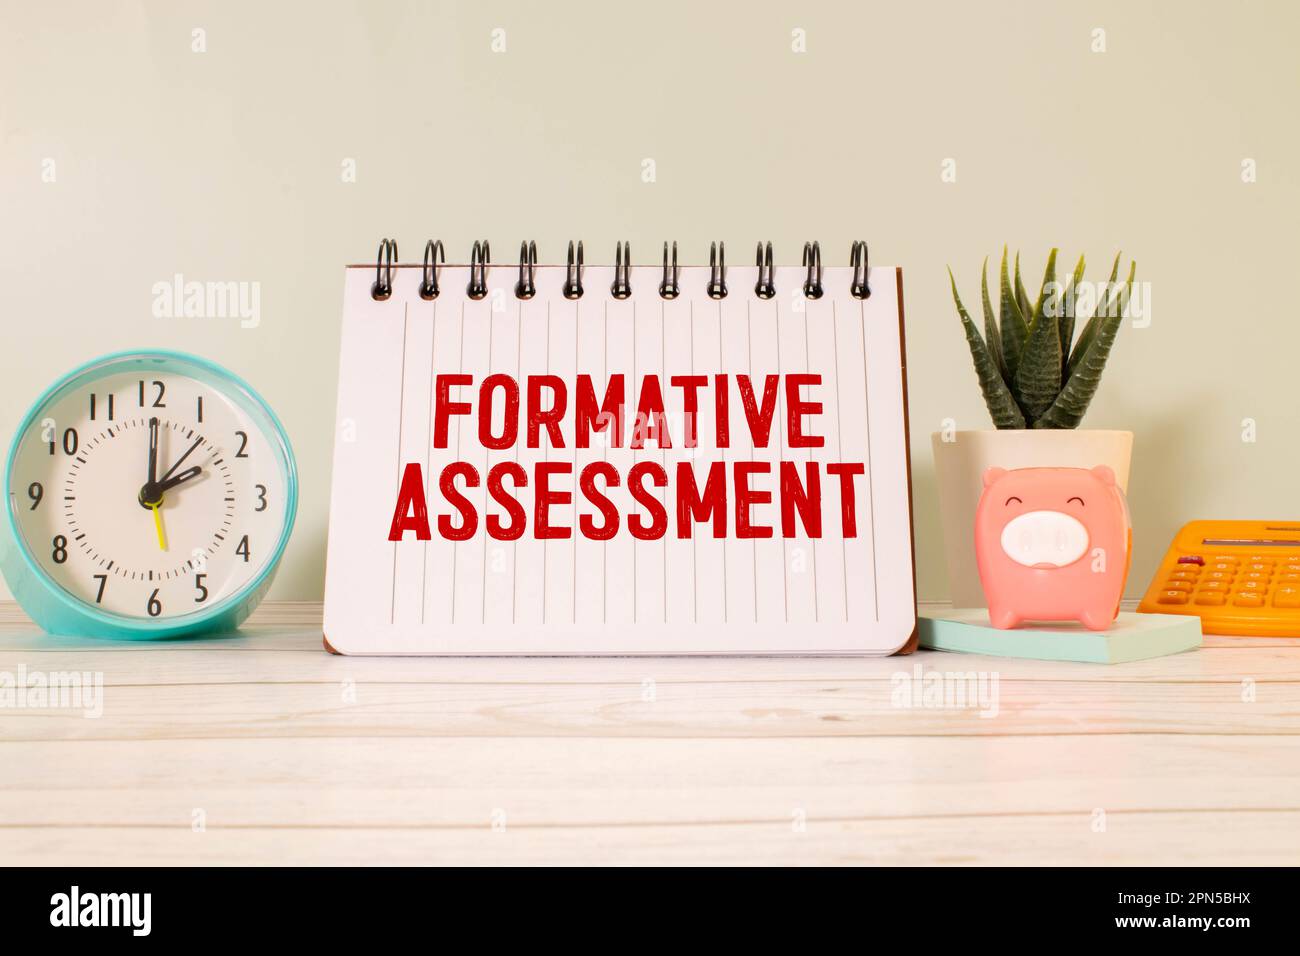 Formative Assessment text on paper in a beautiful envelope. Stock Photo